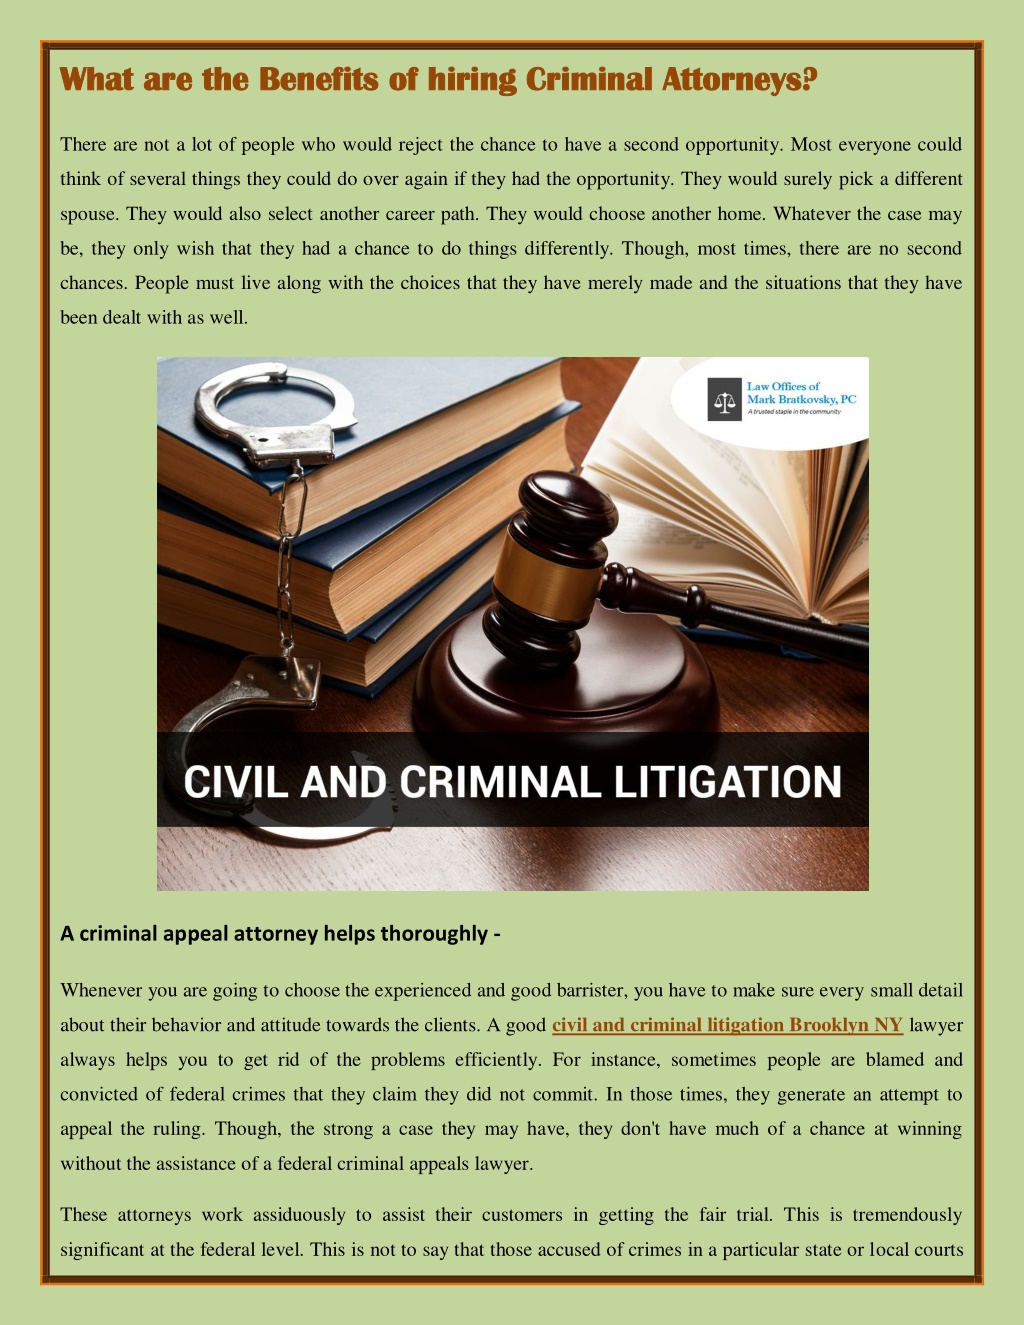 Ppt What Are The Benefits Of Hiring Criminal Attorneys Powerpoint Presentation Id11575570 2108